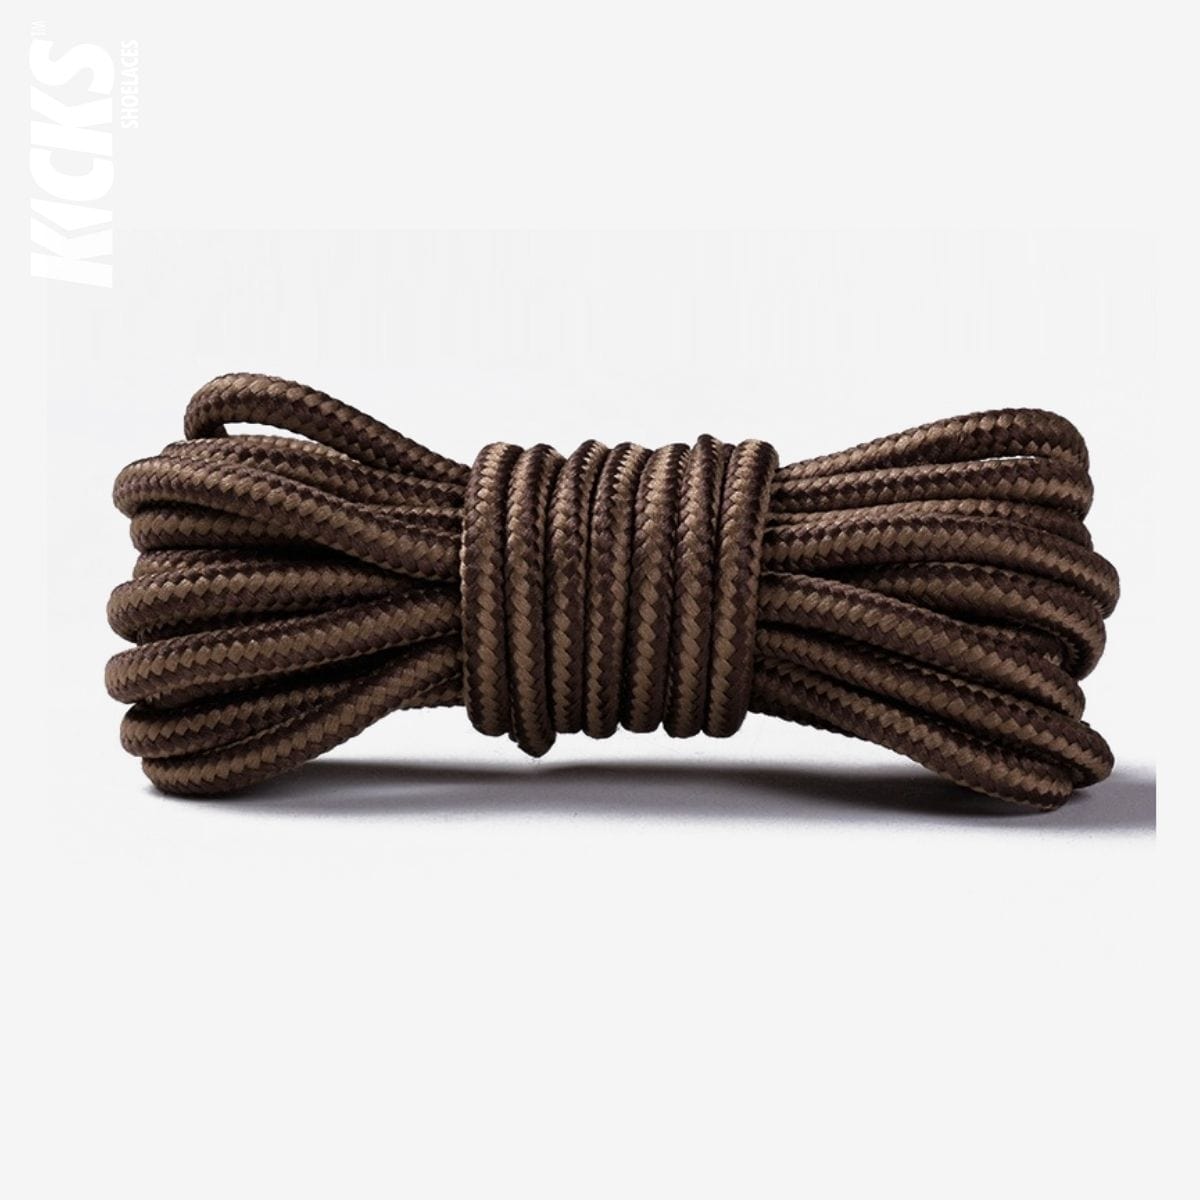 striped-two-color-shoelaces-for-casual-shoes-in-light-brown-and-brown